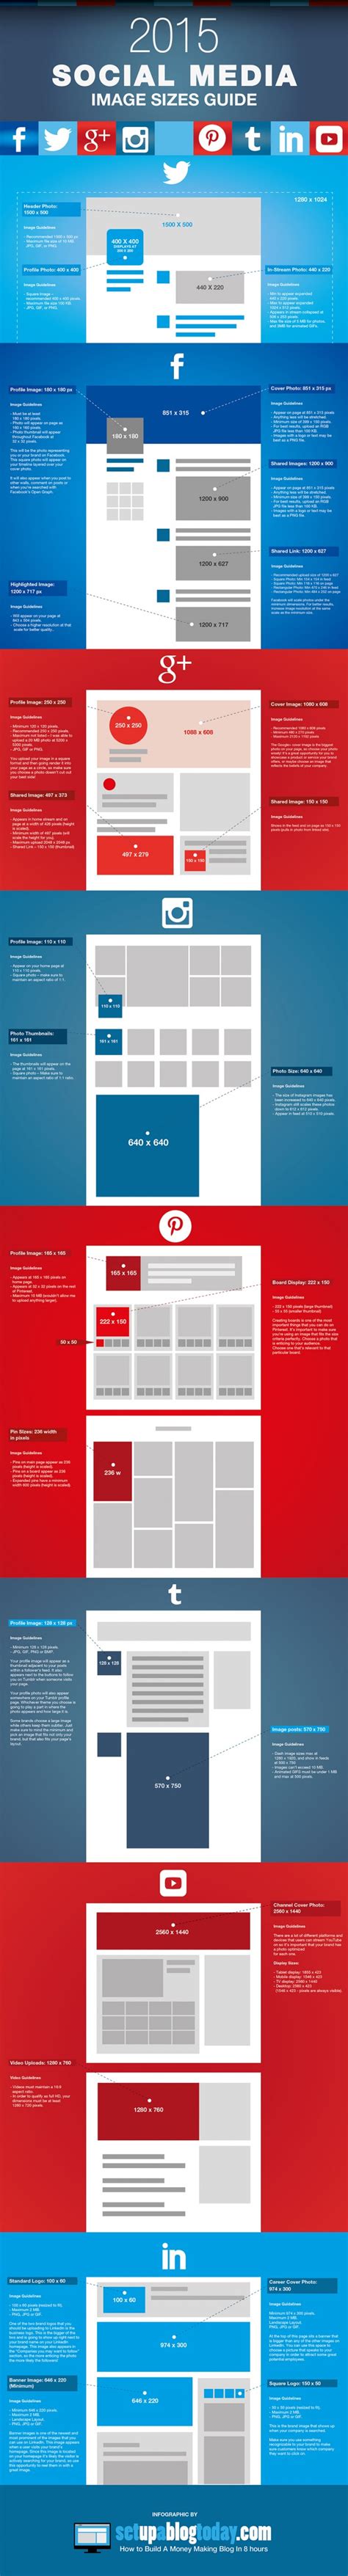 Your Essential Cheat Sheet For Social Media Image Sizes